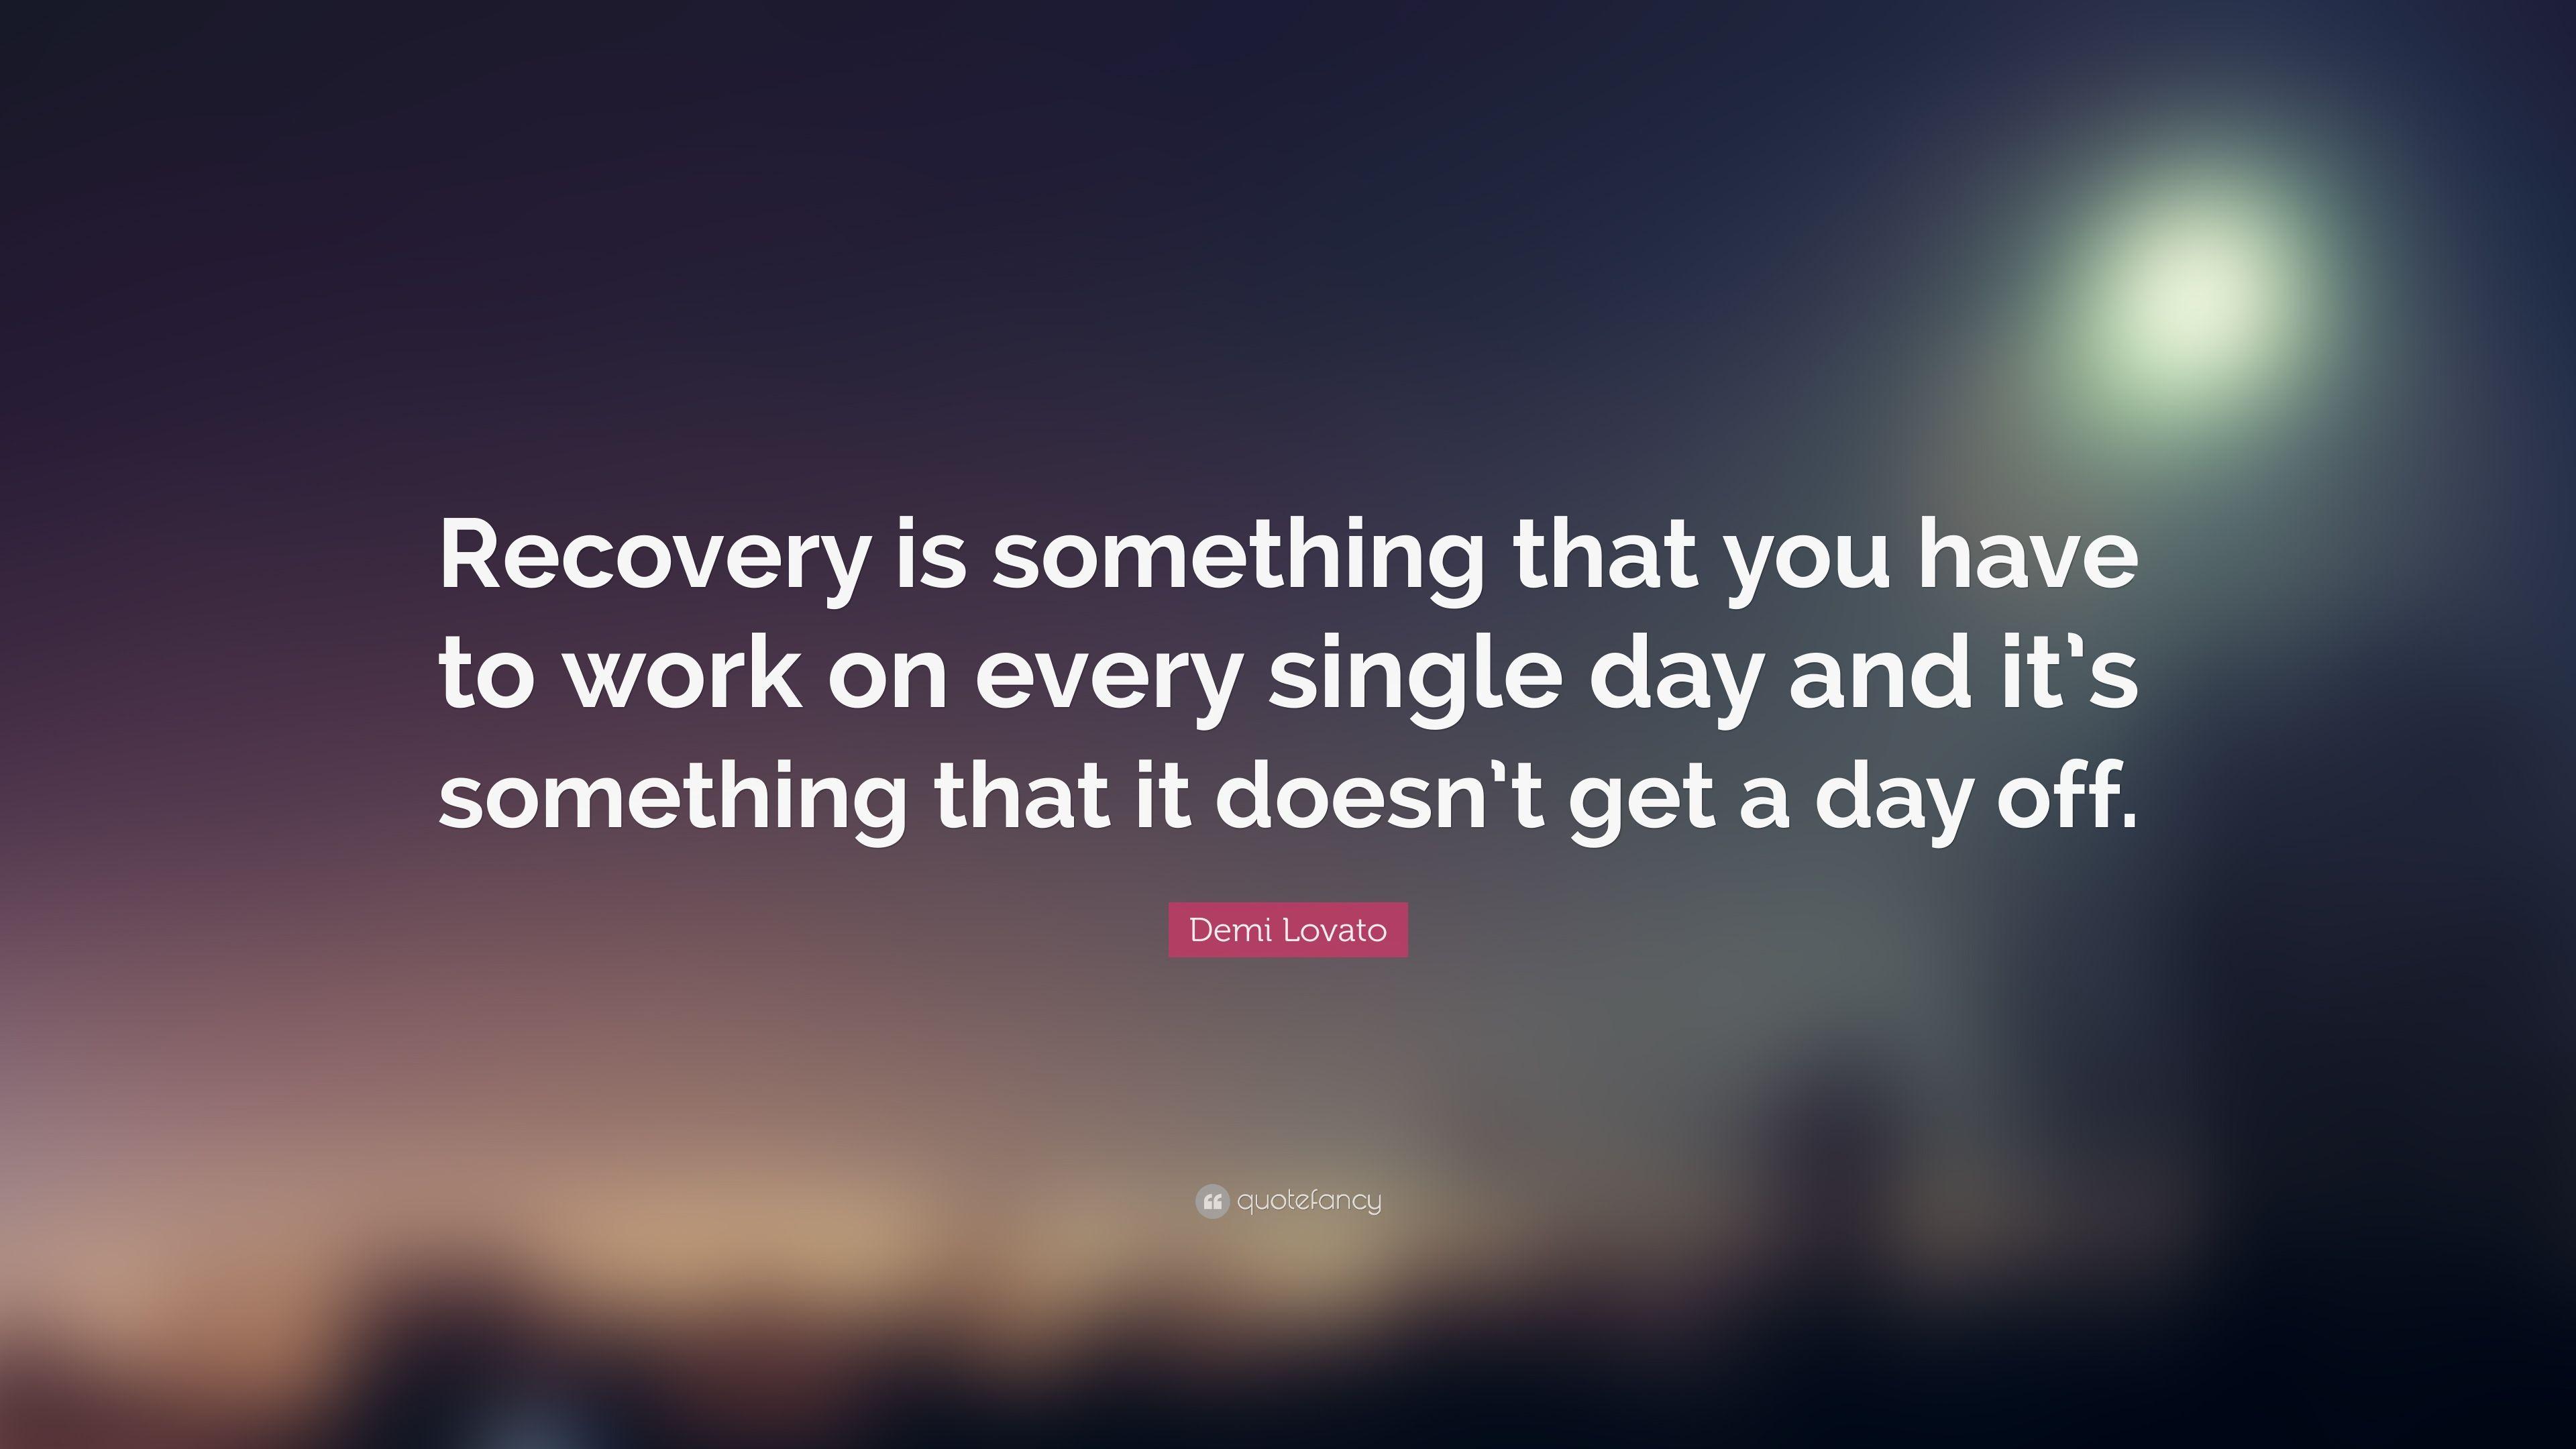 Demi Lovato Quote: “Recovery is something that you have to work